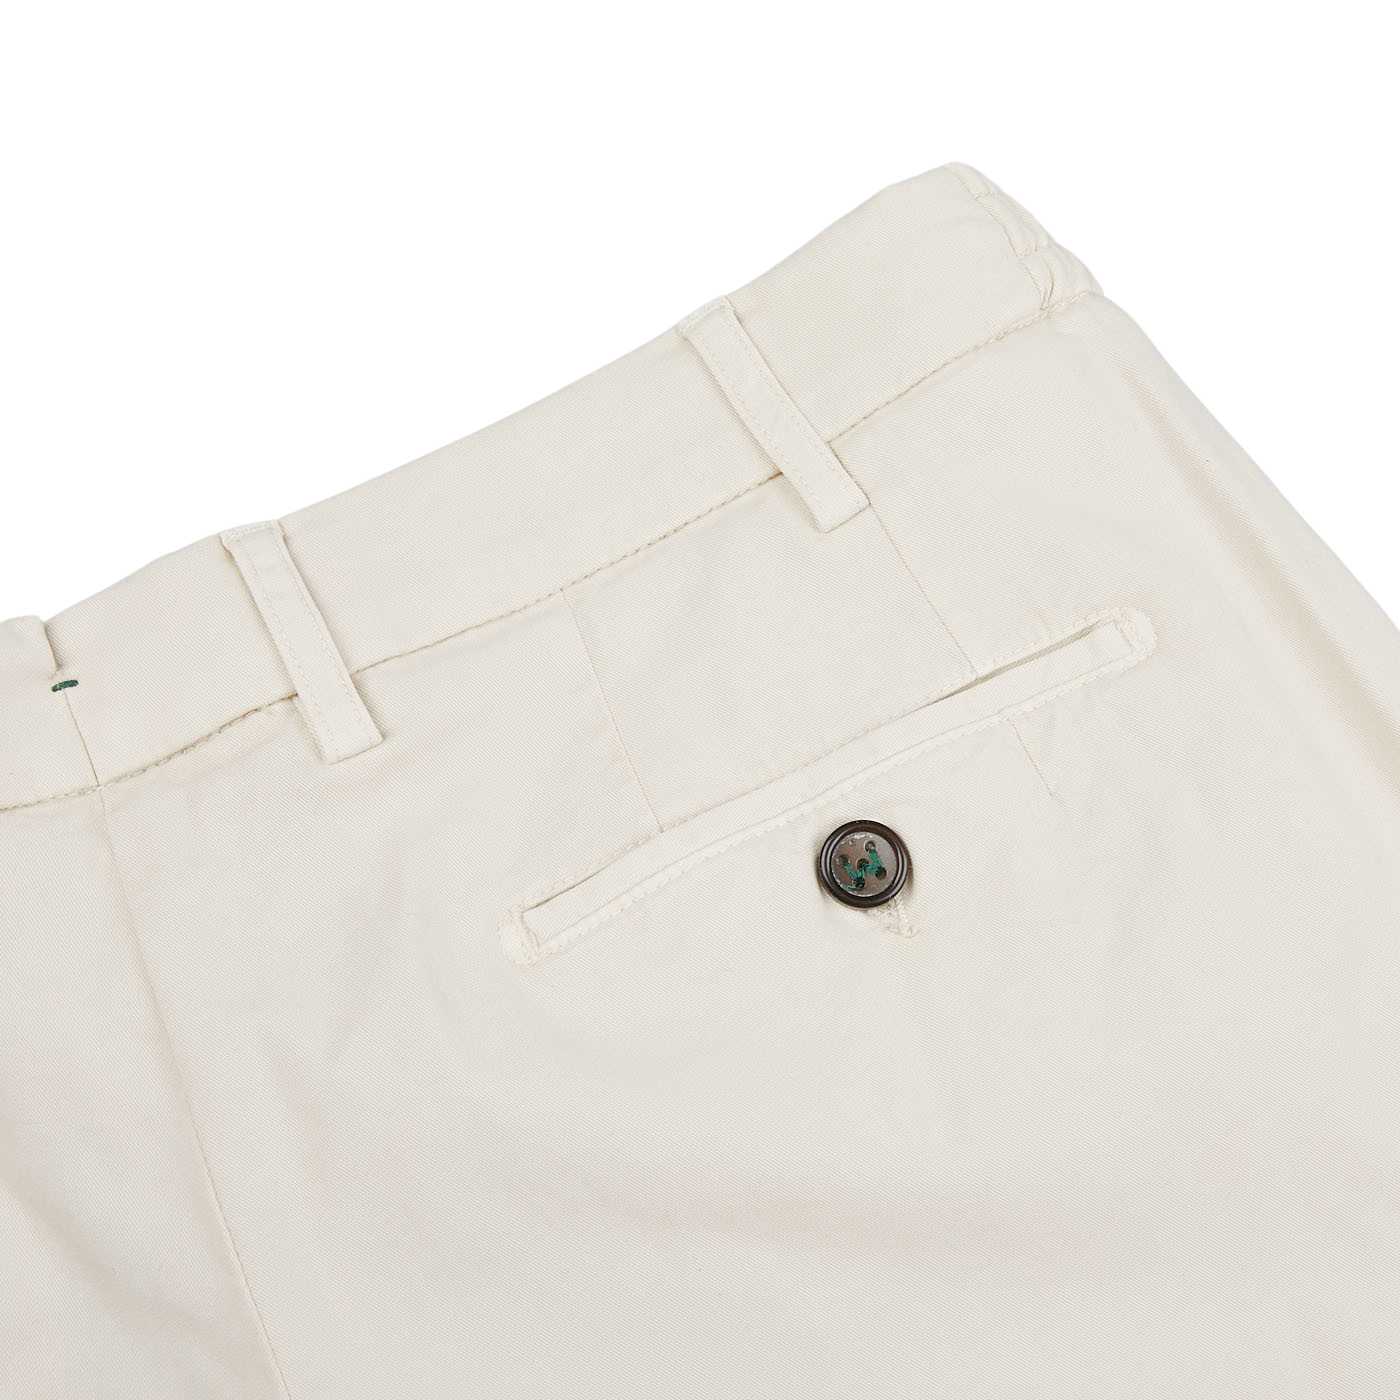 A pair of Light Beige Cotton Stretch Chinos from Berwich with a button on the side.